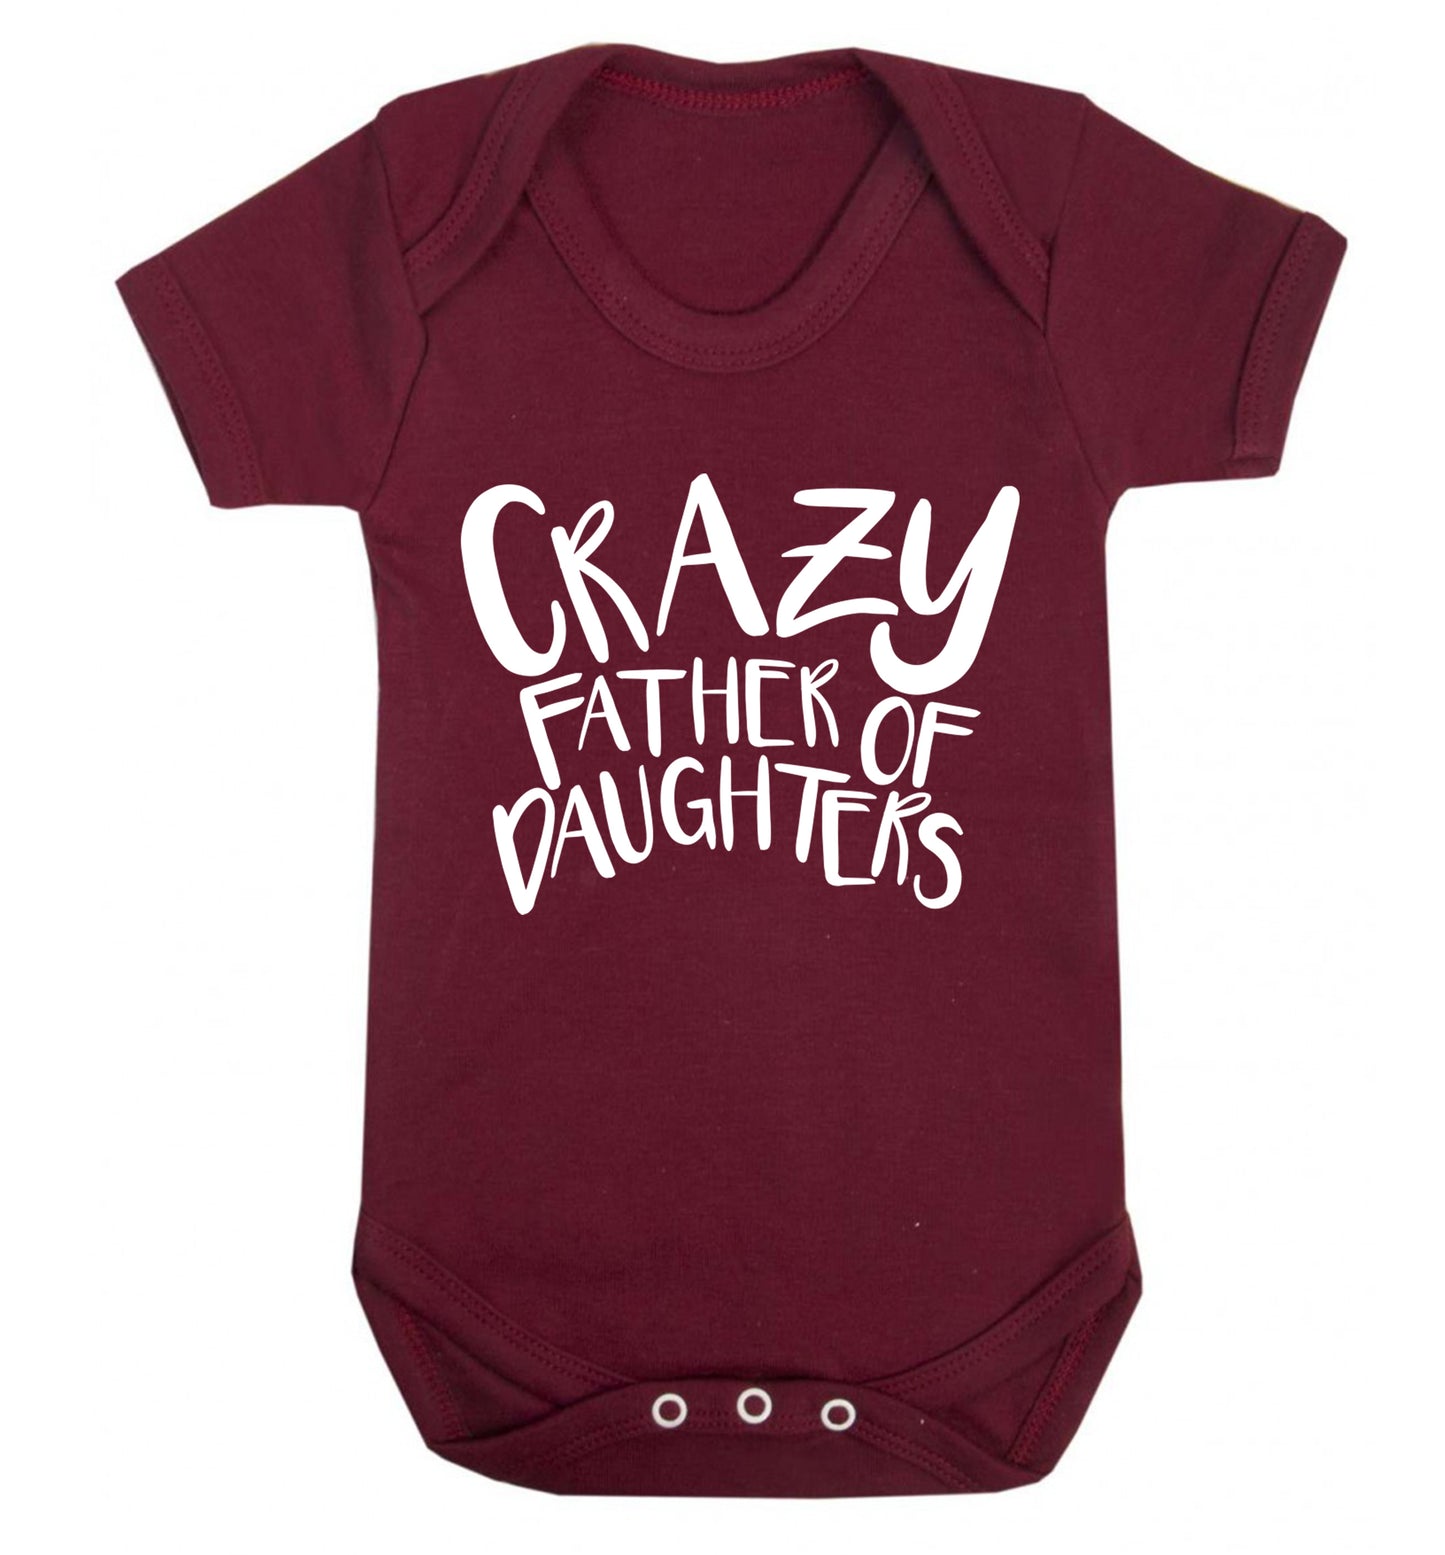 Crazy father of daughters Baby Vest maroon 18-24 months